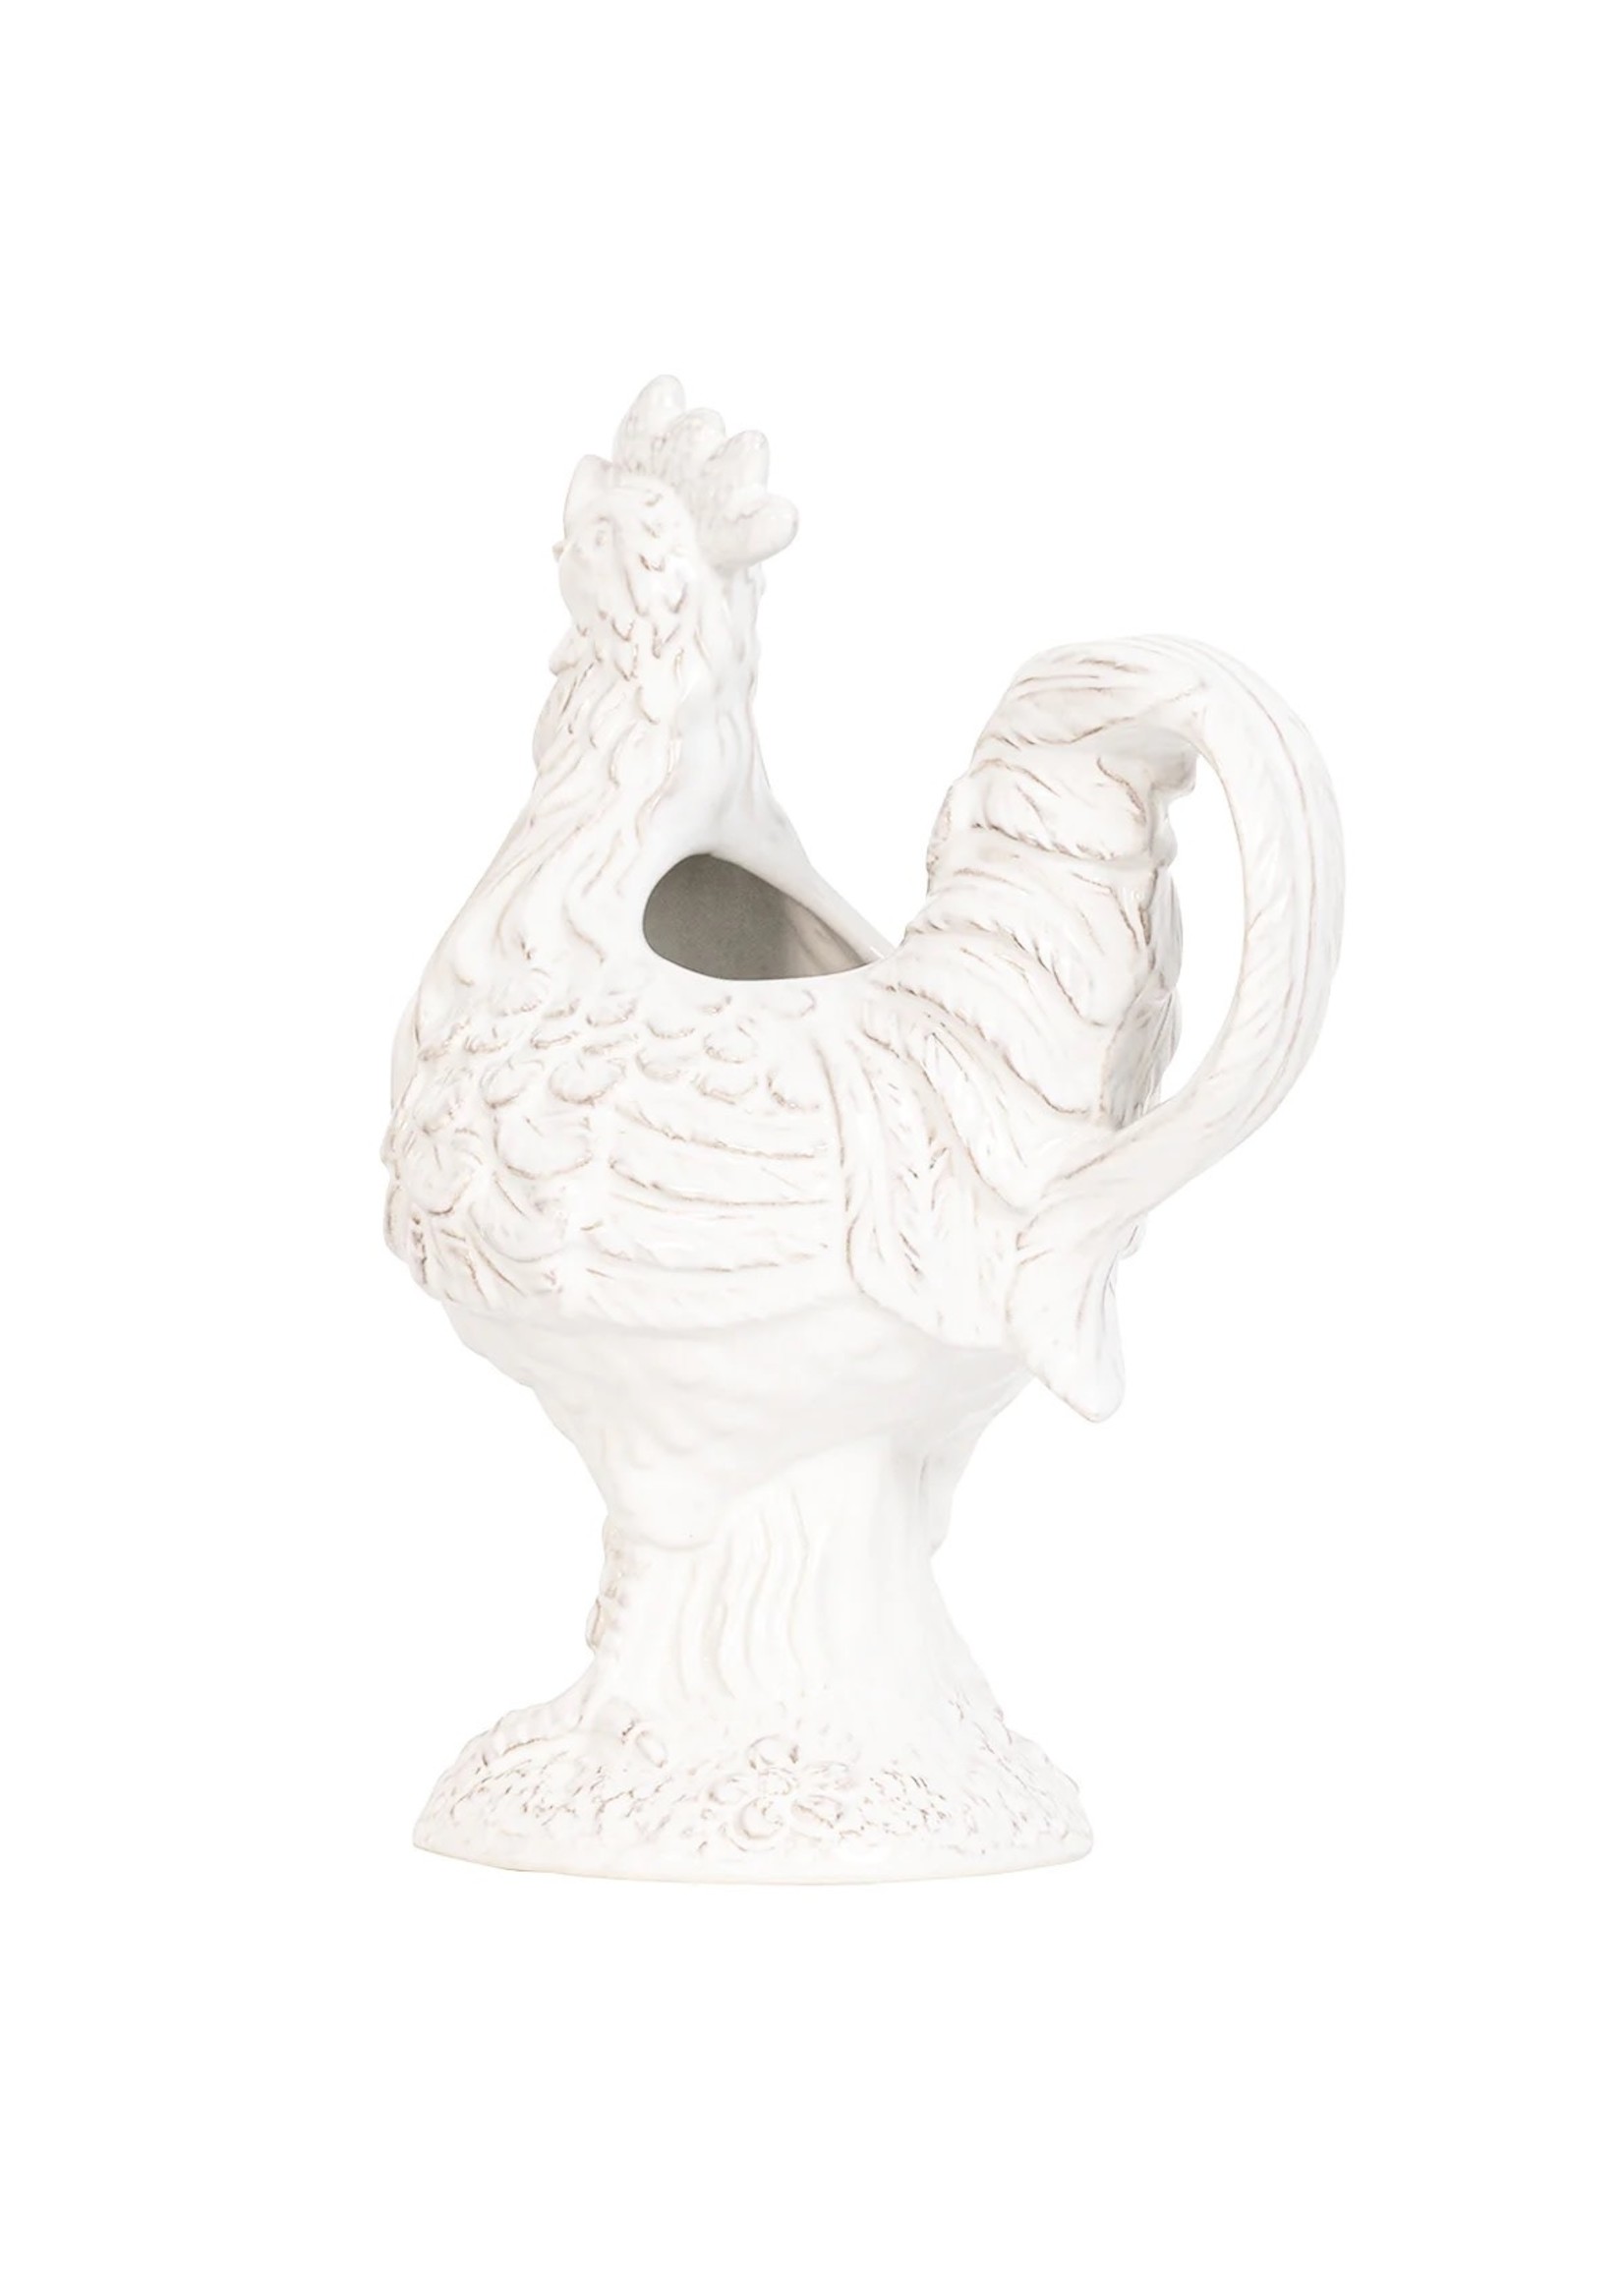 Juliska Clever Creatures - Rousseau the Rooster Pitcher